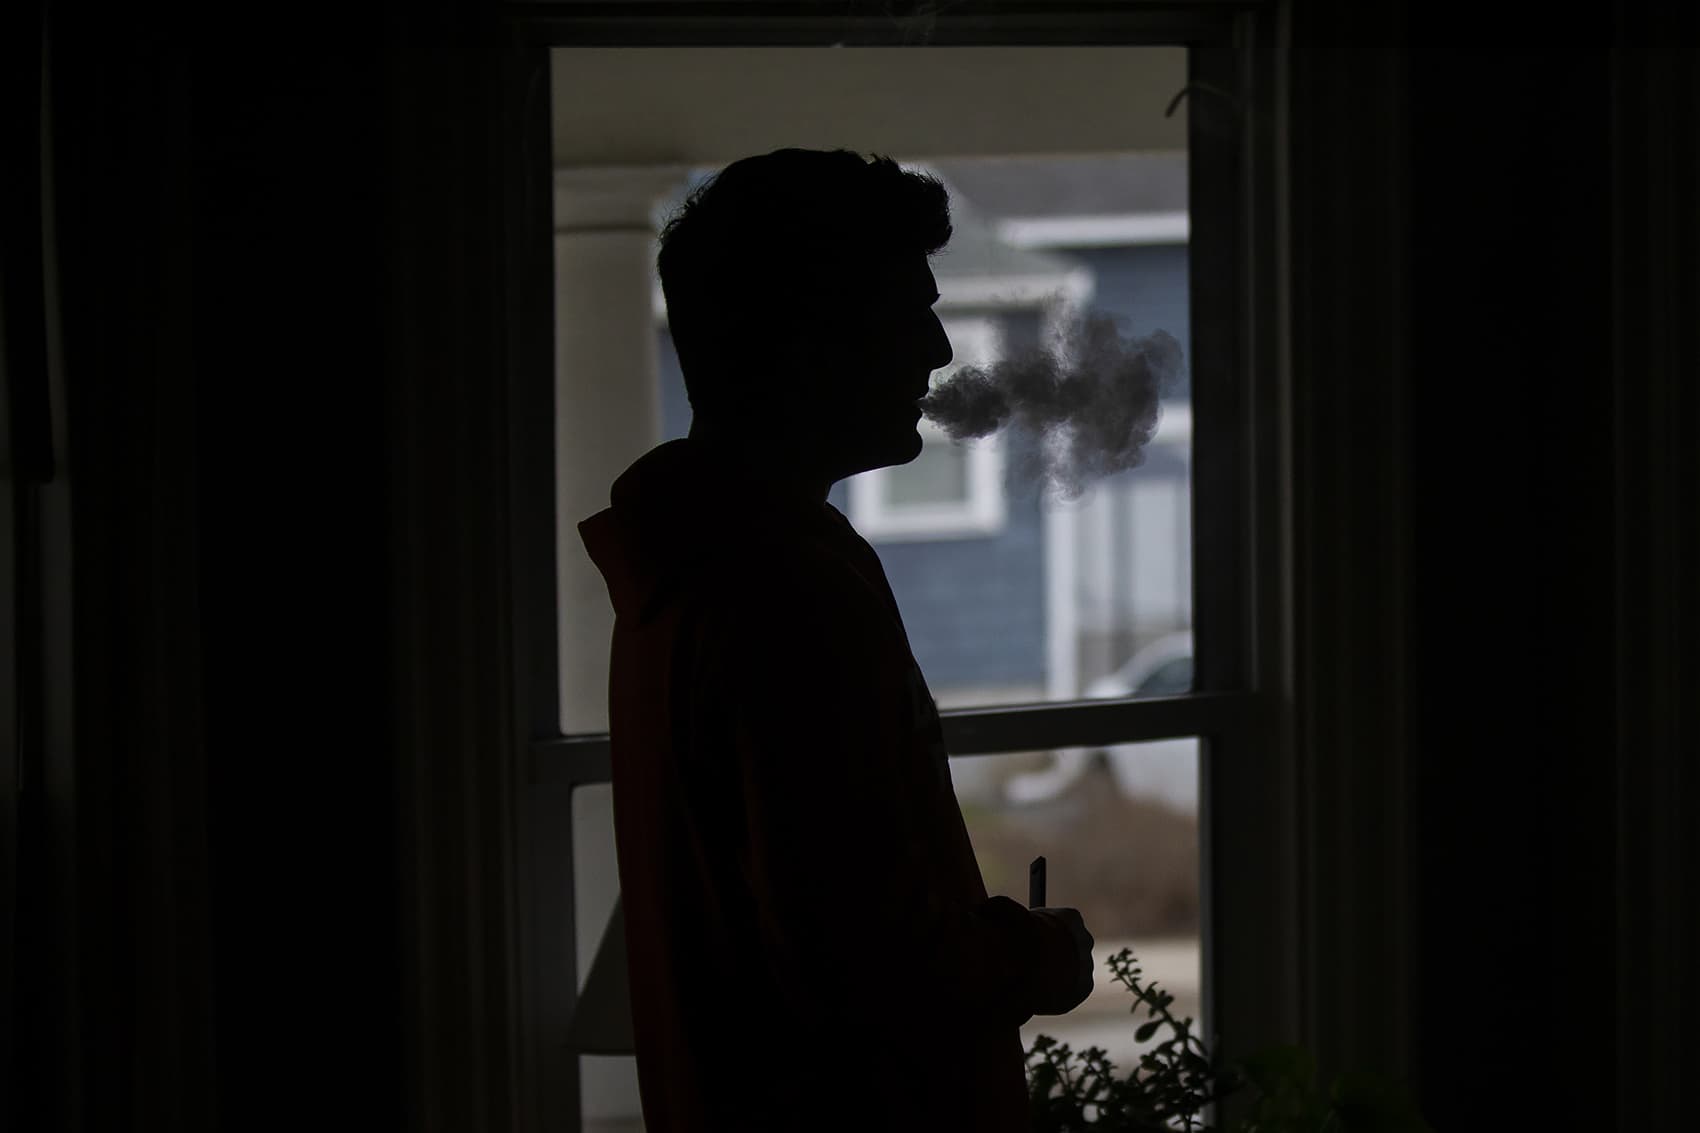 Victor uses a JUUL vaping device at home. (Jesse Costa/WBUR)